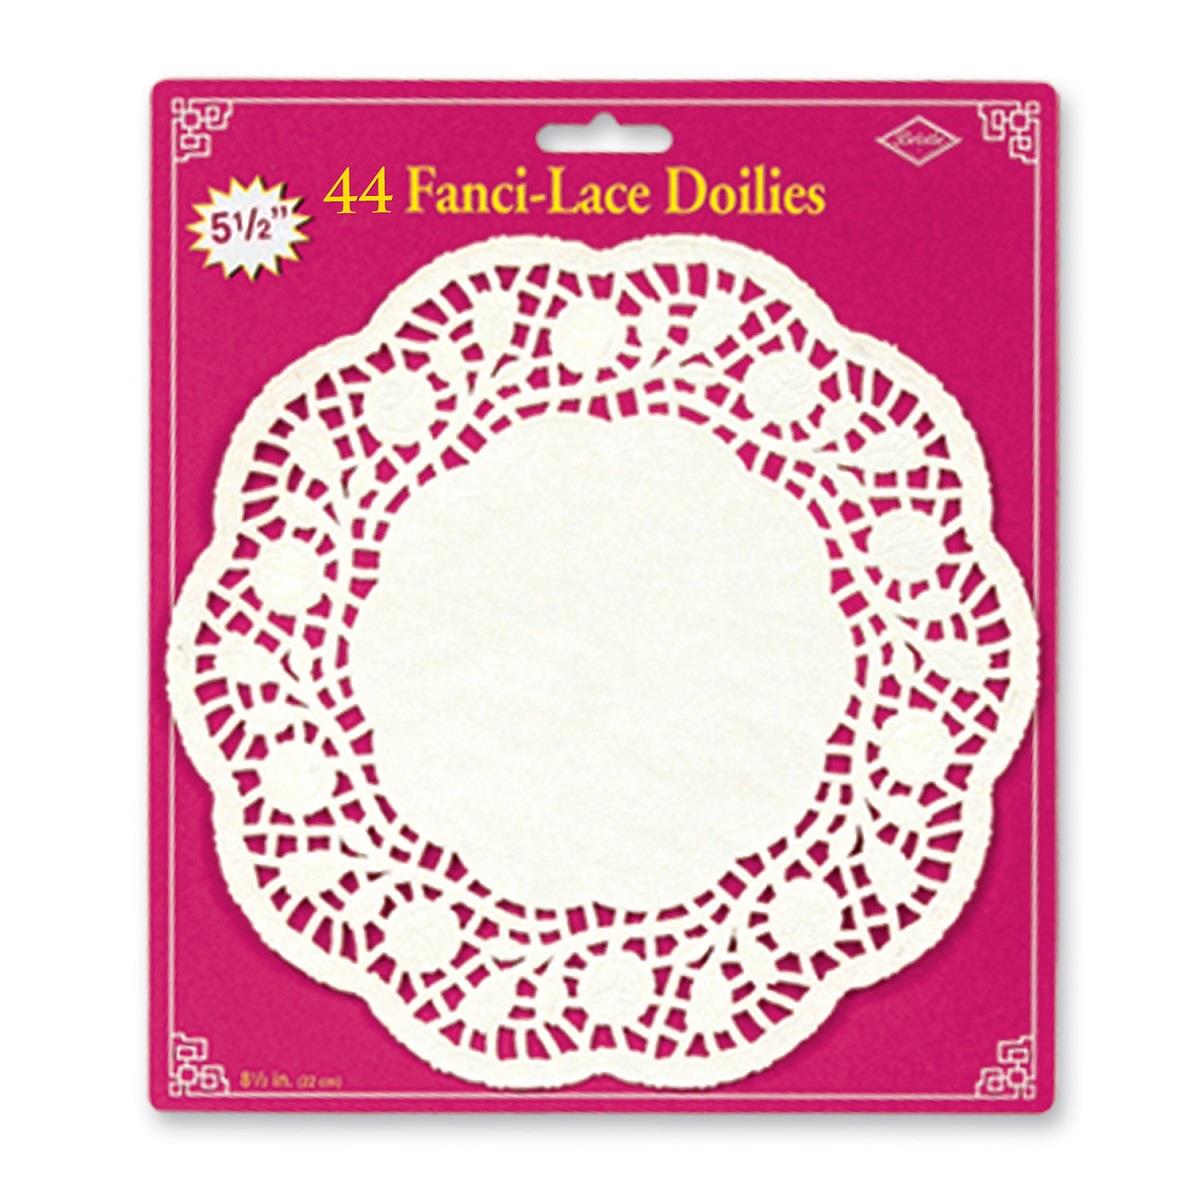 Club Pack of 528 White Fanci Lace Table Top Decoration Doilies 5.5" 